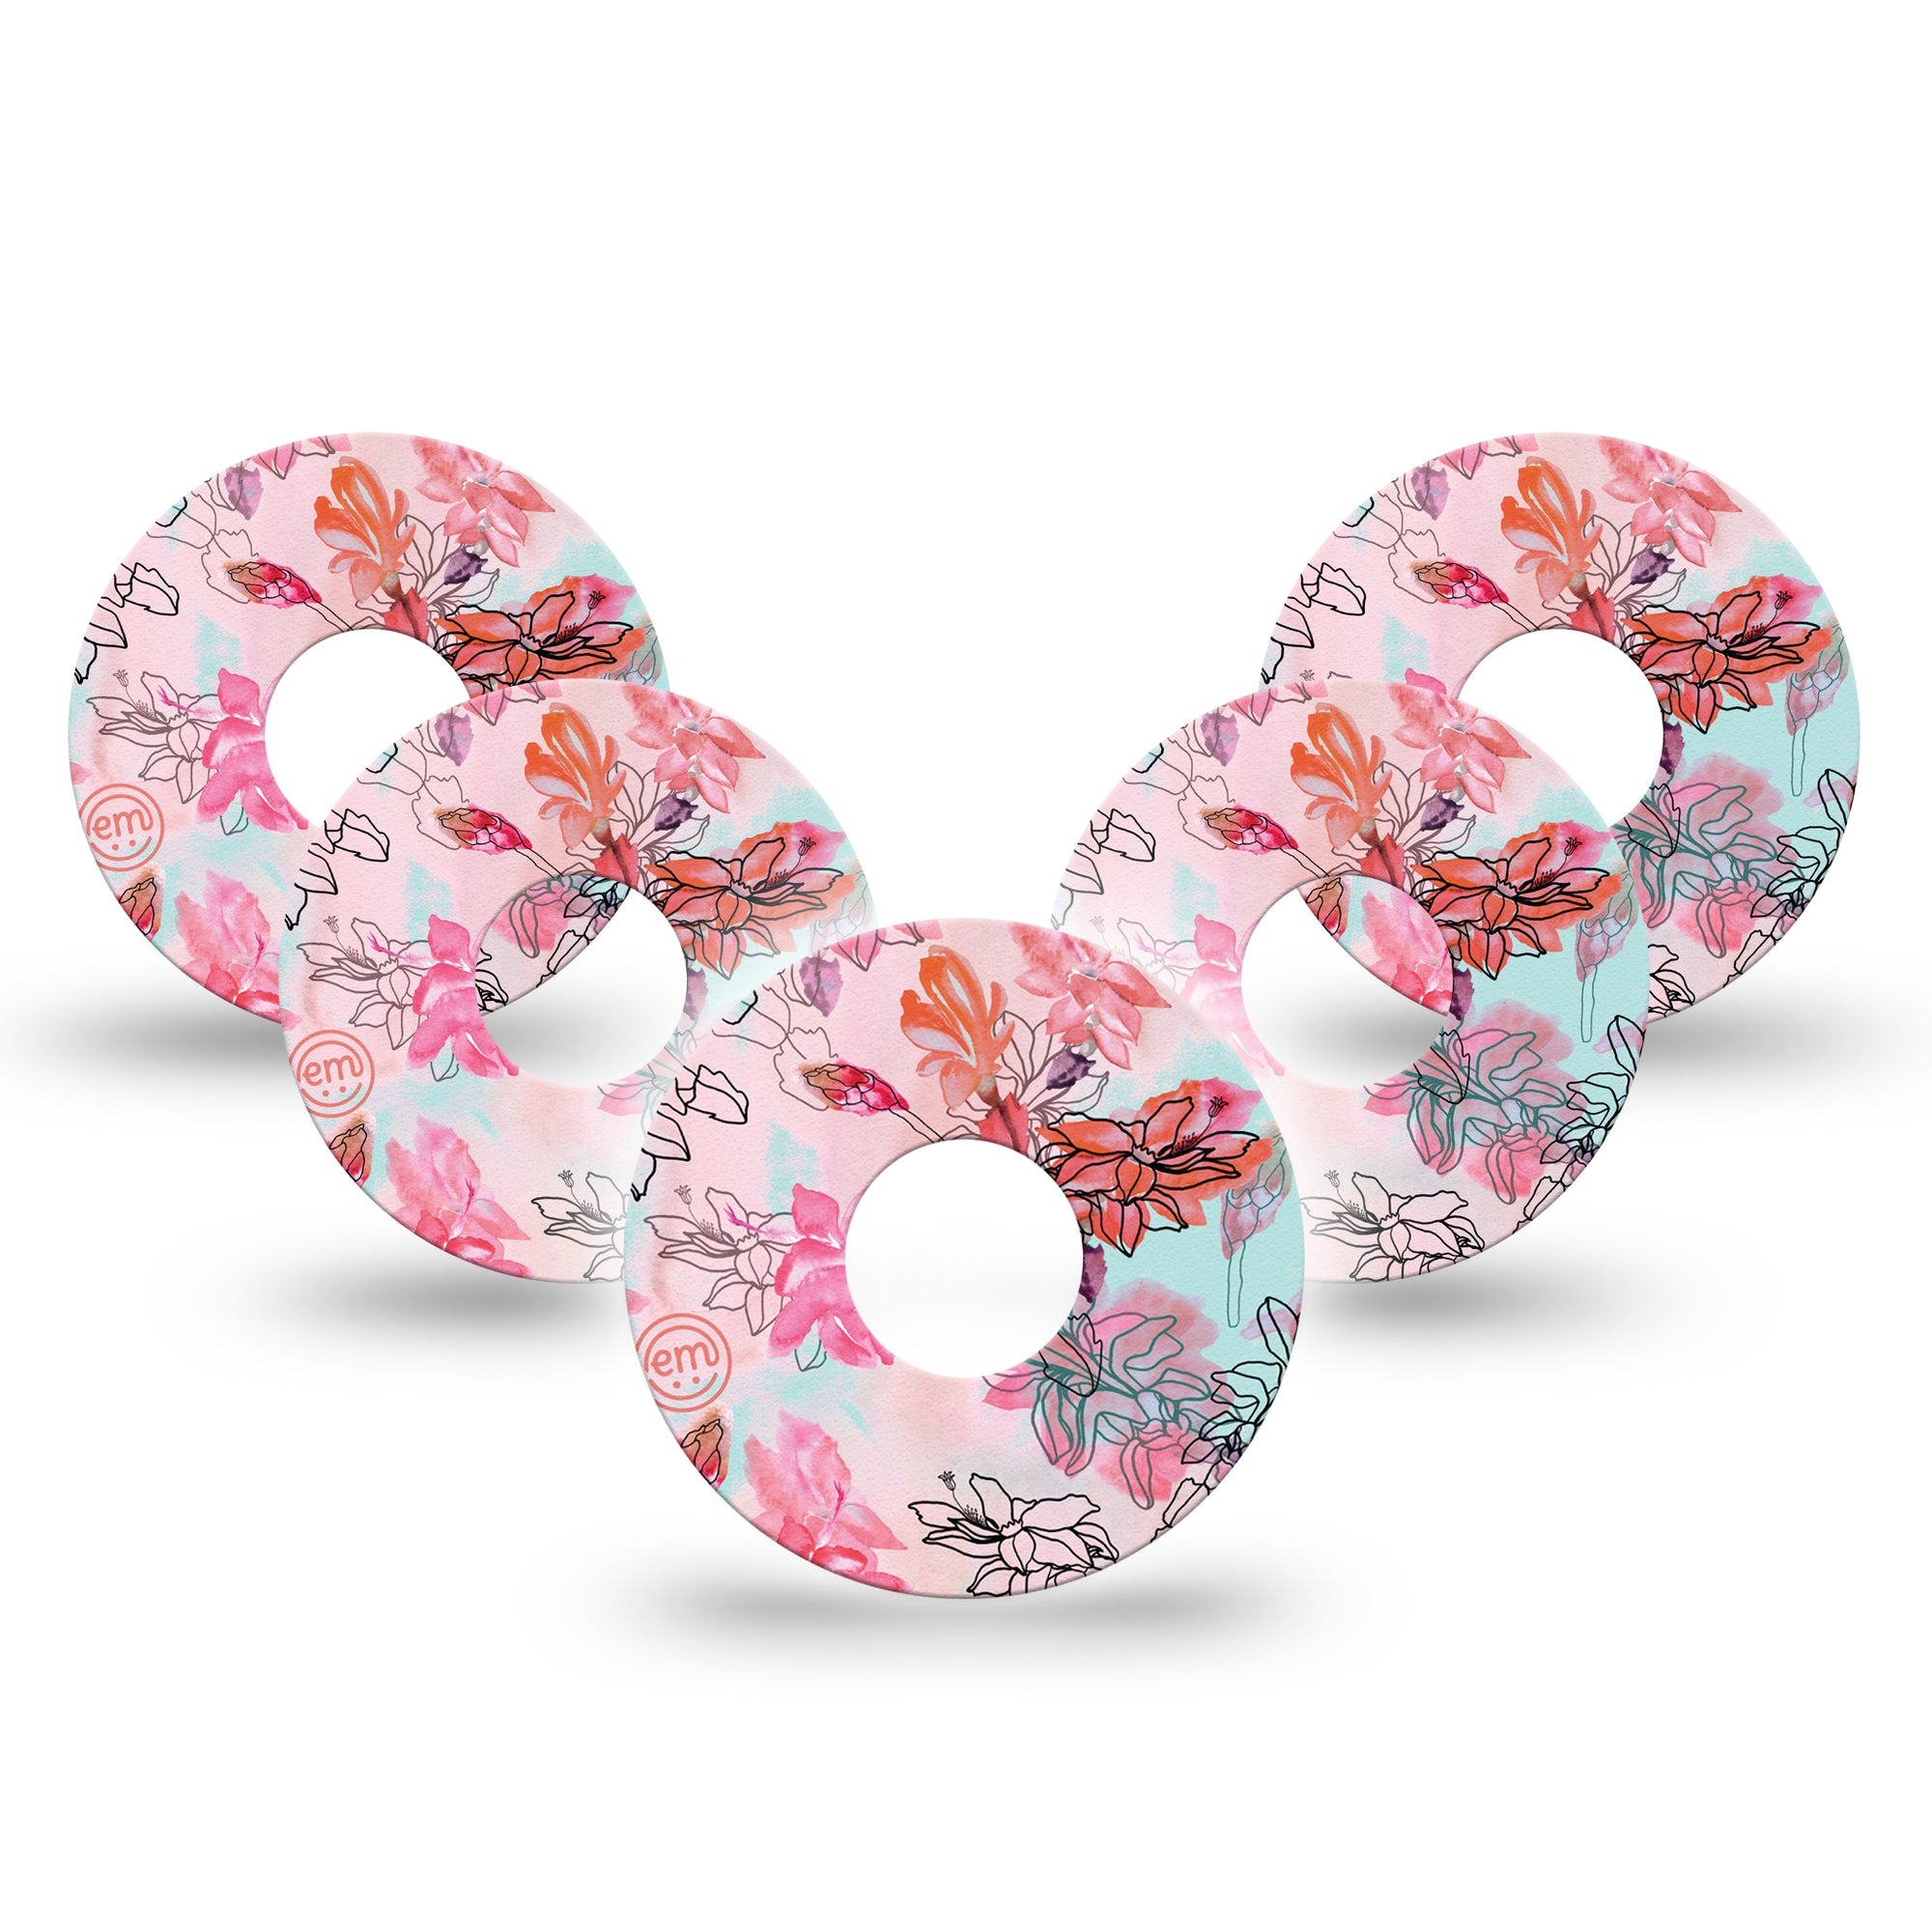 Whimsical Blossoms Libre 3 Tape, 5-Pack, Spring Blooming Inspired, CGM Plaster Patch Design